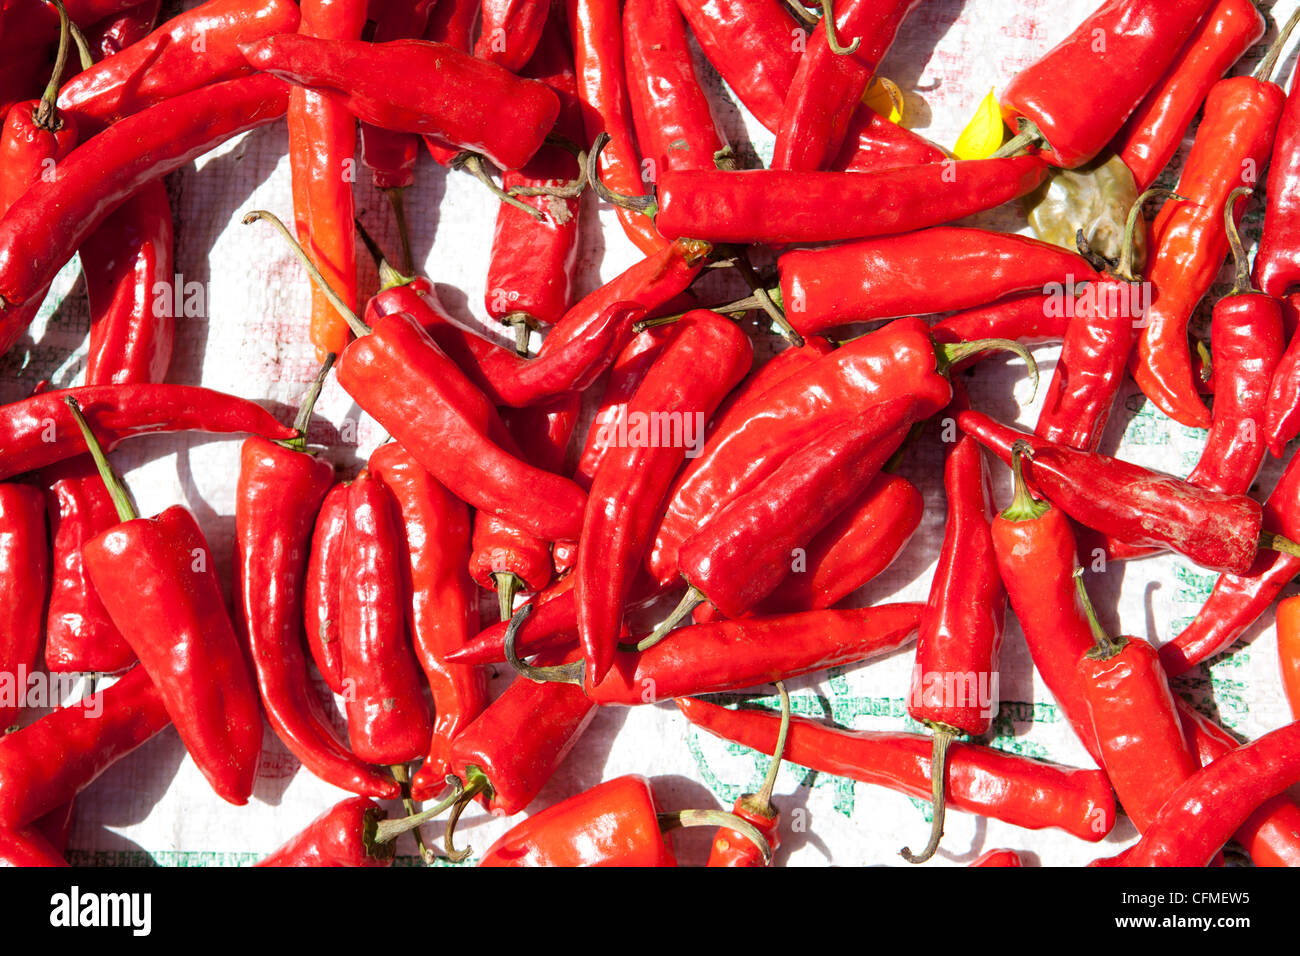 Red chillis drying in the sun Punakha Valley, Bhutan, Asia Stock Photo